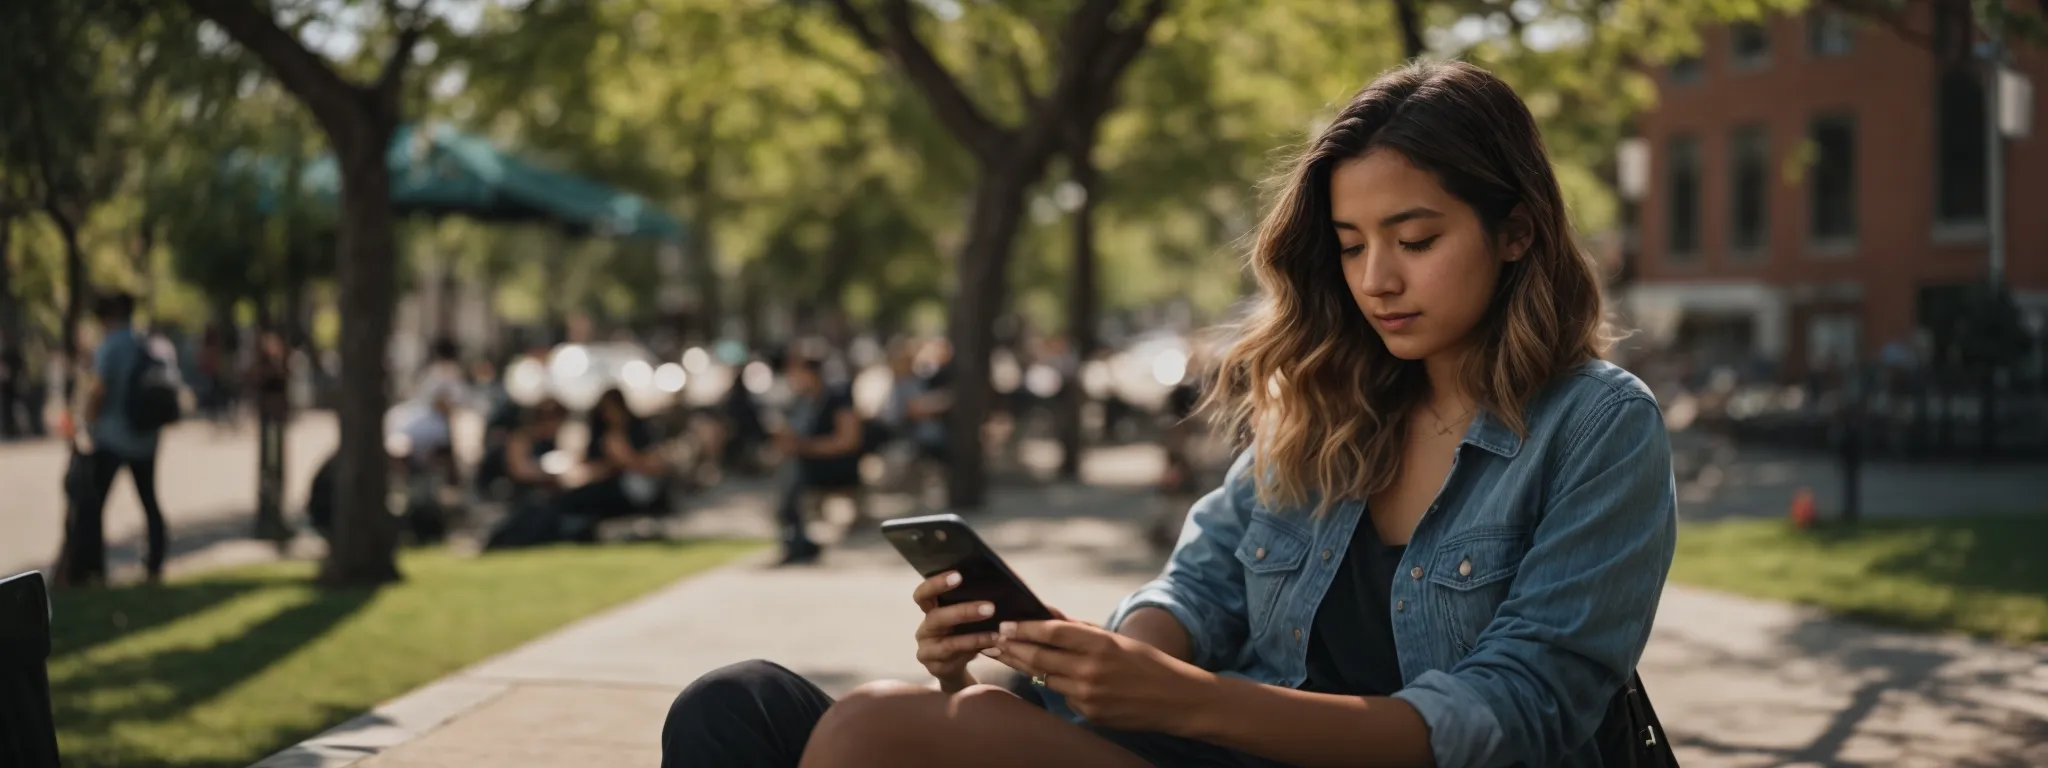 a young filmmaker casually edits a recent video on her smartphone while sitting outside on a sunny day at a bustling urban park.